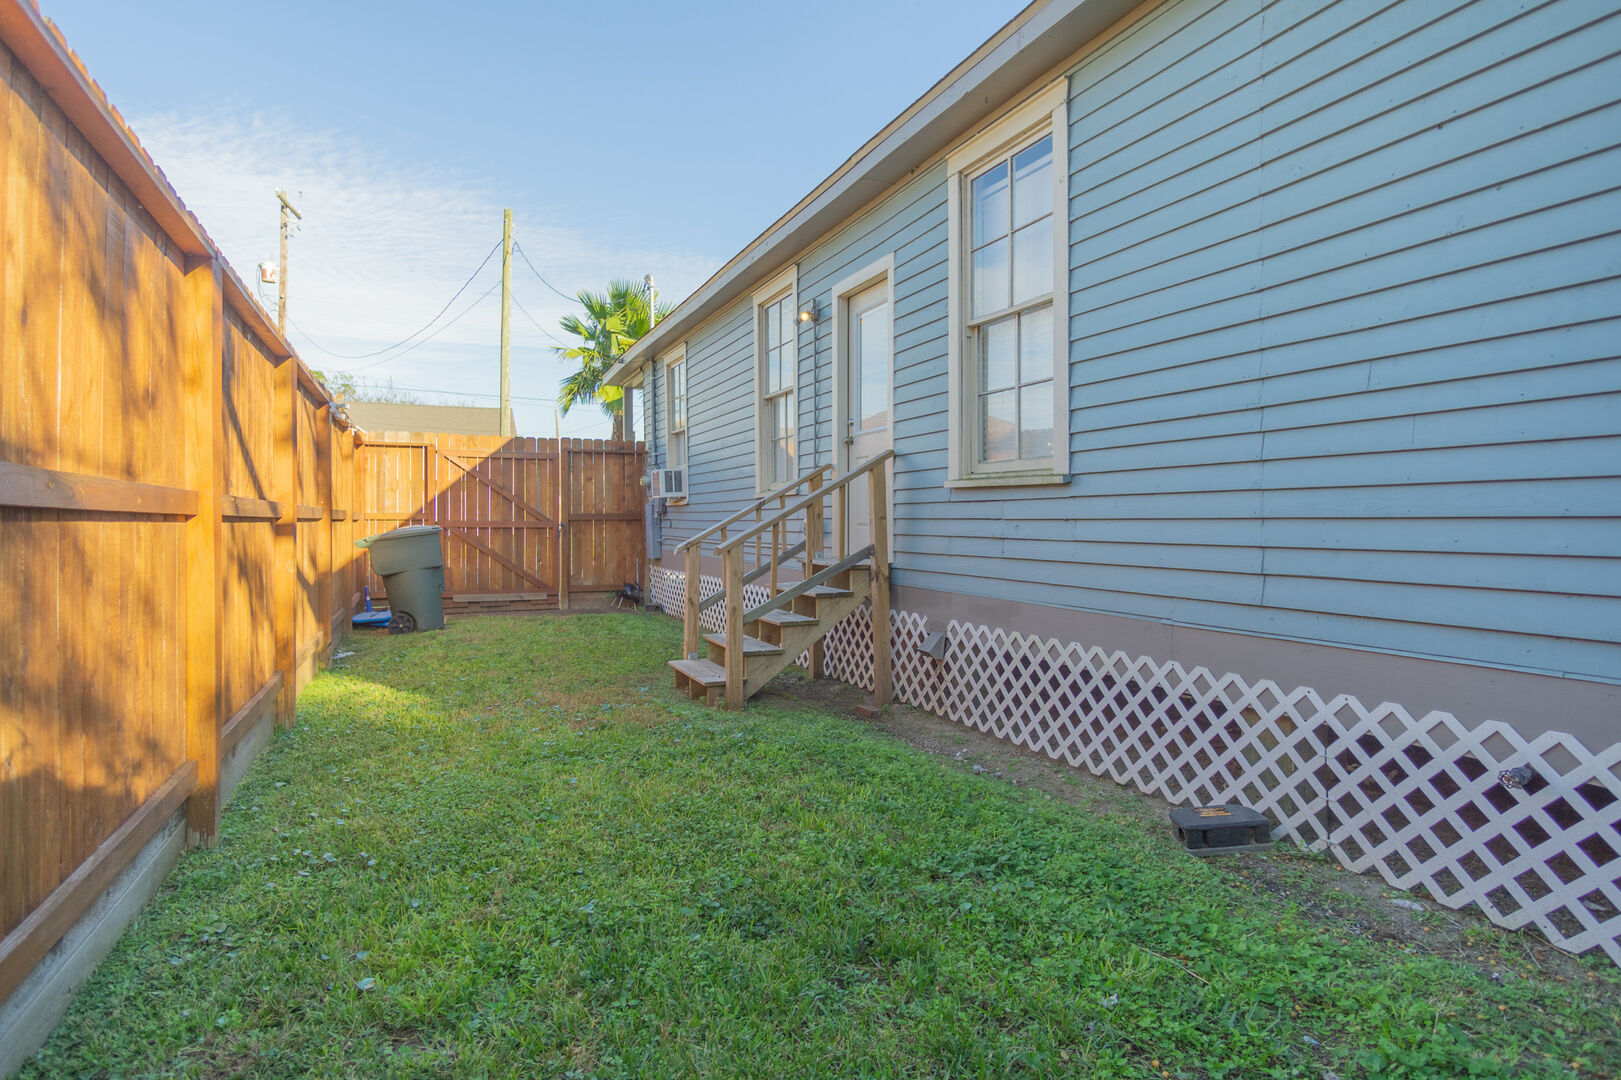 Fenced in side yard for you and your furry friends to enjoy!